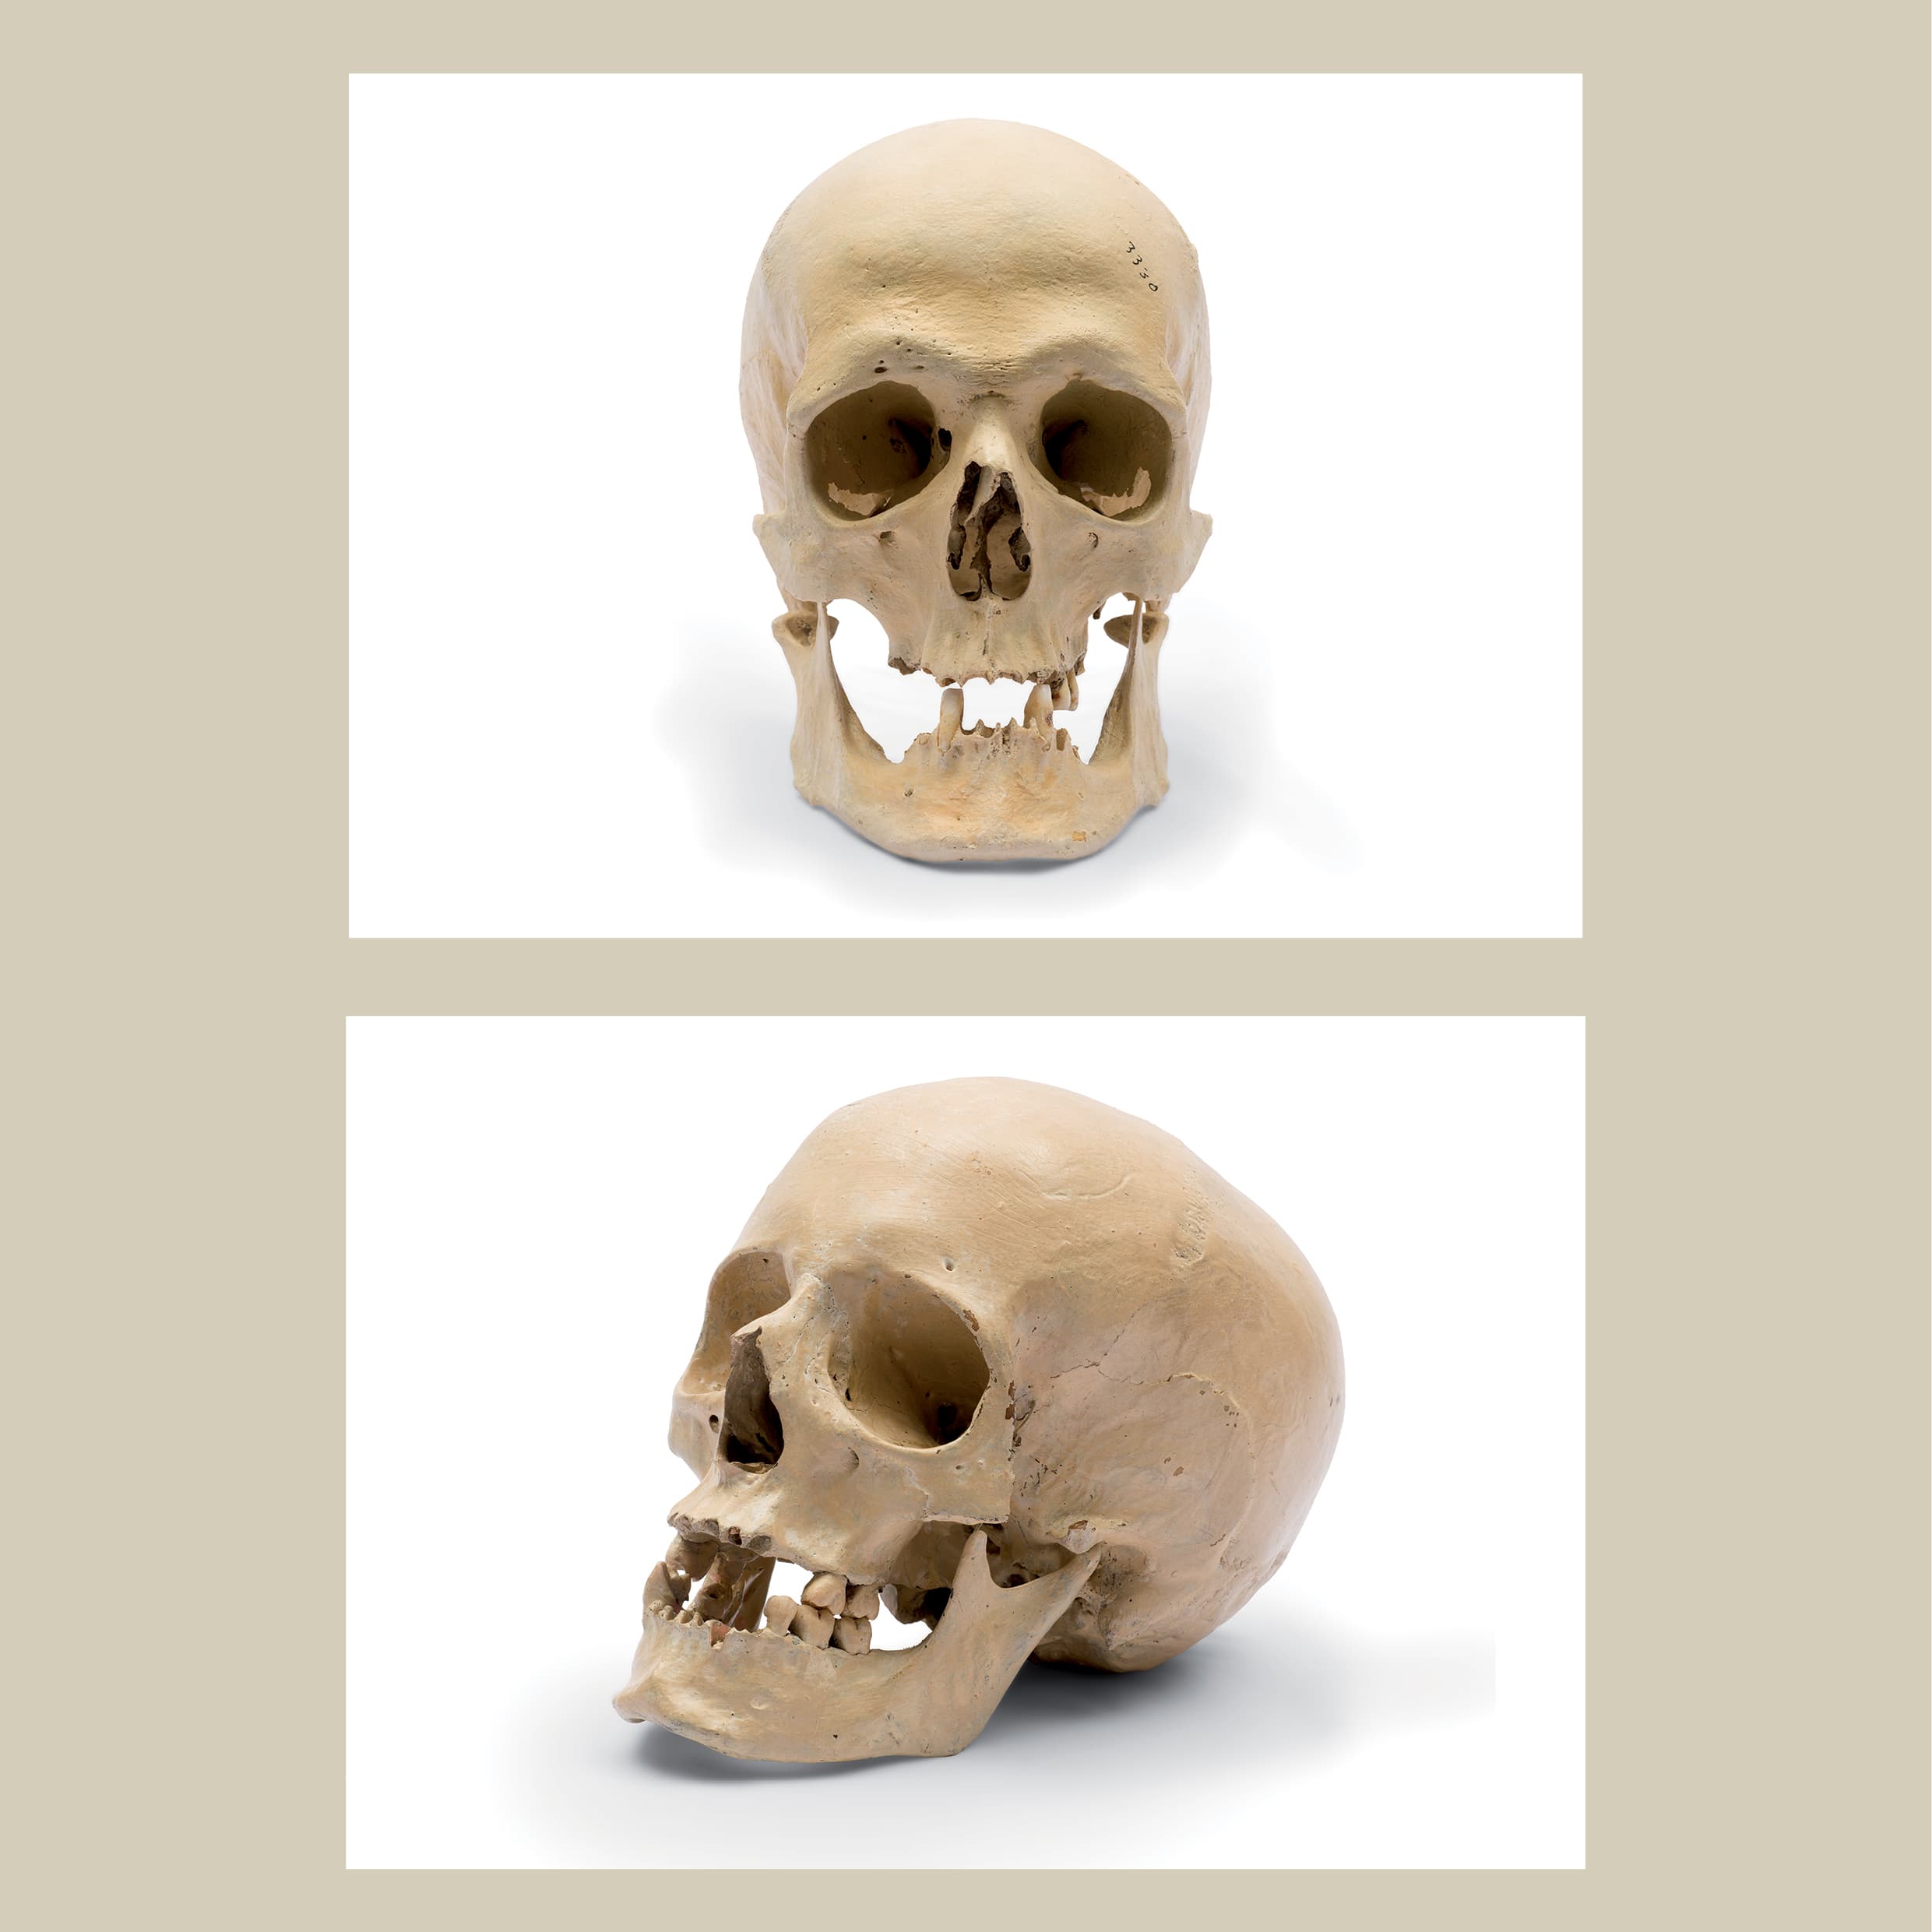 <strong>Skull of Frances Lydia Alice Knorr</strong> (1868–1894), human skull, skull and upper jaw 15.0 × 13.5 × 19.0 cm; lower jaw 6.3 × 11.5 × 10.0 cm. HFA Teaching Collection 3091, gift of the National Trust of Australia (Victoria) to the Melbourne Dental School, University of Melbourne, 2006.<br><br><strong>Skull of Martha Needle</strong> (1863–1894), human skull, 15.5 × 13.0 × 22.3 cm. HFA Teaching Collection 3093, gift of the National Trust of Australia (Victoria) to the Melbourne Dental School, University of Melbourne, 2006.